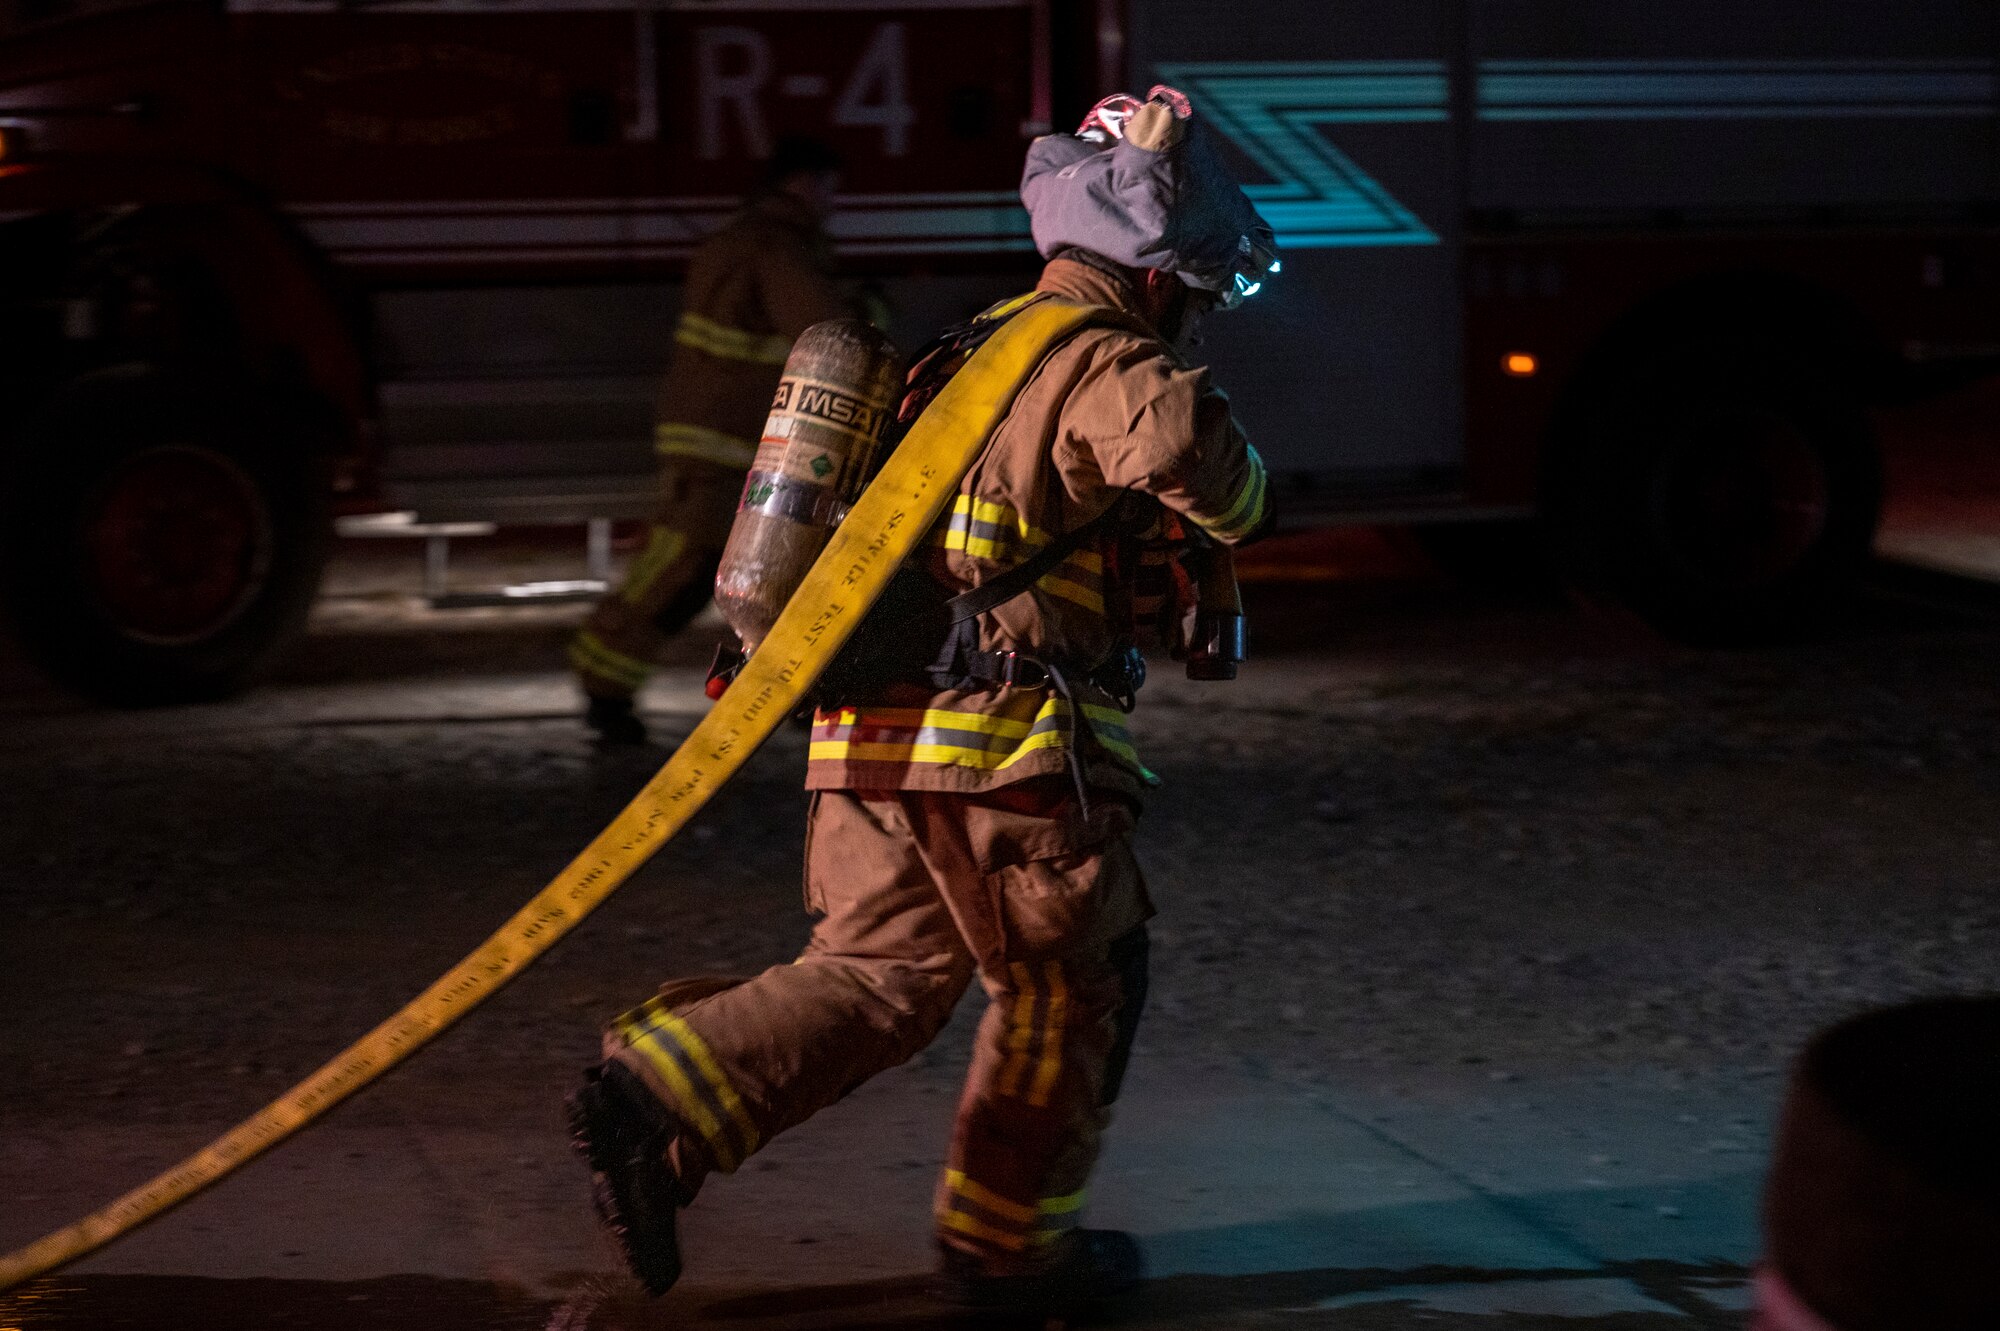 U.S. Air Force Staff Sgt. Larry McIver, 51st Civil Engineer Squadron (CES) lead firefighter, drags a hose after a fire response training scenario at Osan Air Base, Republic of Korea, Sept. 14, 2022.